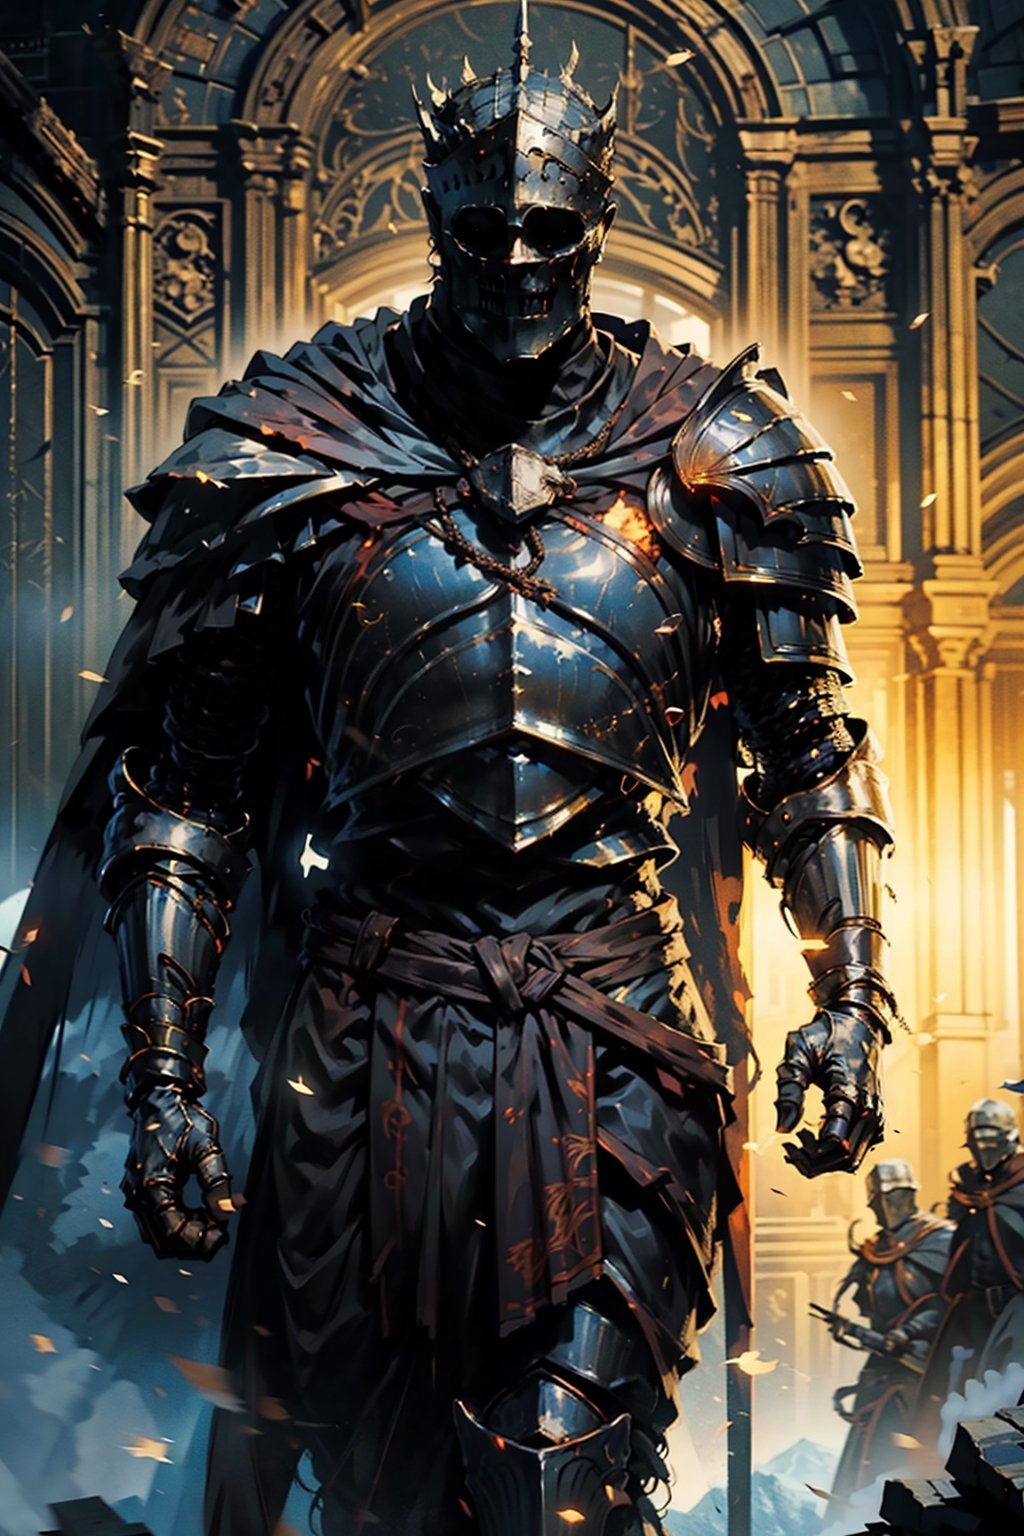 high quality, higher details, masterpiece, beautiful, 4k, 8k, epic ((full shot)), knight's high-ranking armor

The armor of a high-ranking knight would be impressive and elaborate, designed for both protection and to showcase their status and power. It would be made of the highest-quality tempered steel or forged iron, with intricate handcrafted details and gold or silver ornamentation denoting their authority.

The helm would be imposing, with a decorated visor and additional face and neck protection. Adornments on the helm might include protruding feathers or crests, indicating their status as a military leader or noble.

The breastplate and pauldrons would be broad and sturdy, providing maximum protection for the torso and shoulders. They would be decorated with heraldic emblems identifying their lineage and loyalties.

The greaves and sabatons would be designed to protect the legs and feet while allowing necessary mobility on the battlefield. They might feature intricate engravings reflecting the knight's history and deeds.

In addition to the main armor, the knight might wear an elaborate cape of bright colors, adorned with symbols of their house or kingdom. This cape would not only provide some additional protection but also add a touch of elegance and majesty to their appearance.

Overall, the armor of a high-ranking knight would be an impressive and functional work of art, reflecting their status, power, and skill in battle.,Soul_of_Cinder,Artorias,nodf_lora